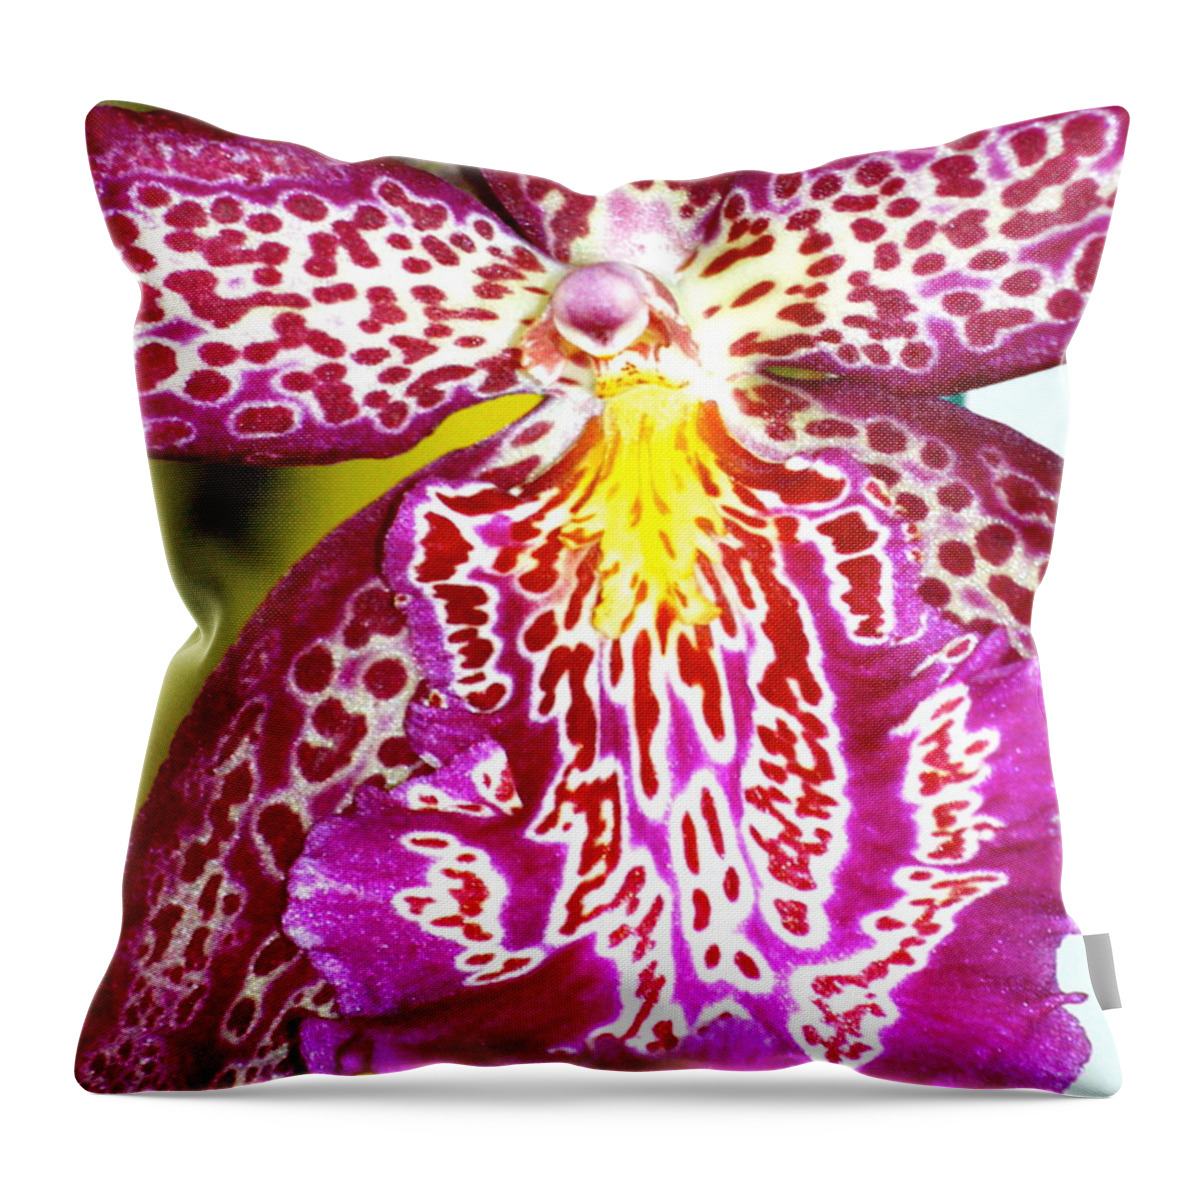 Orchid Throw Pillow featuring the photograph Spotted Orchid by Lehua Pekelo-Stearns